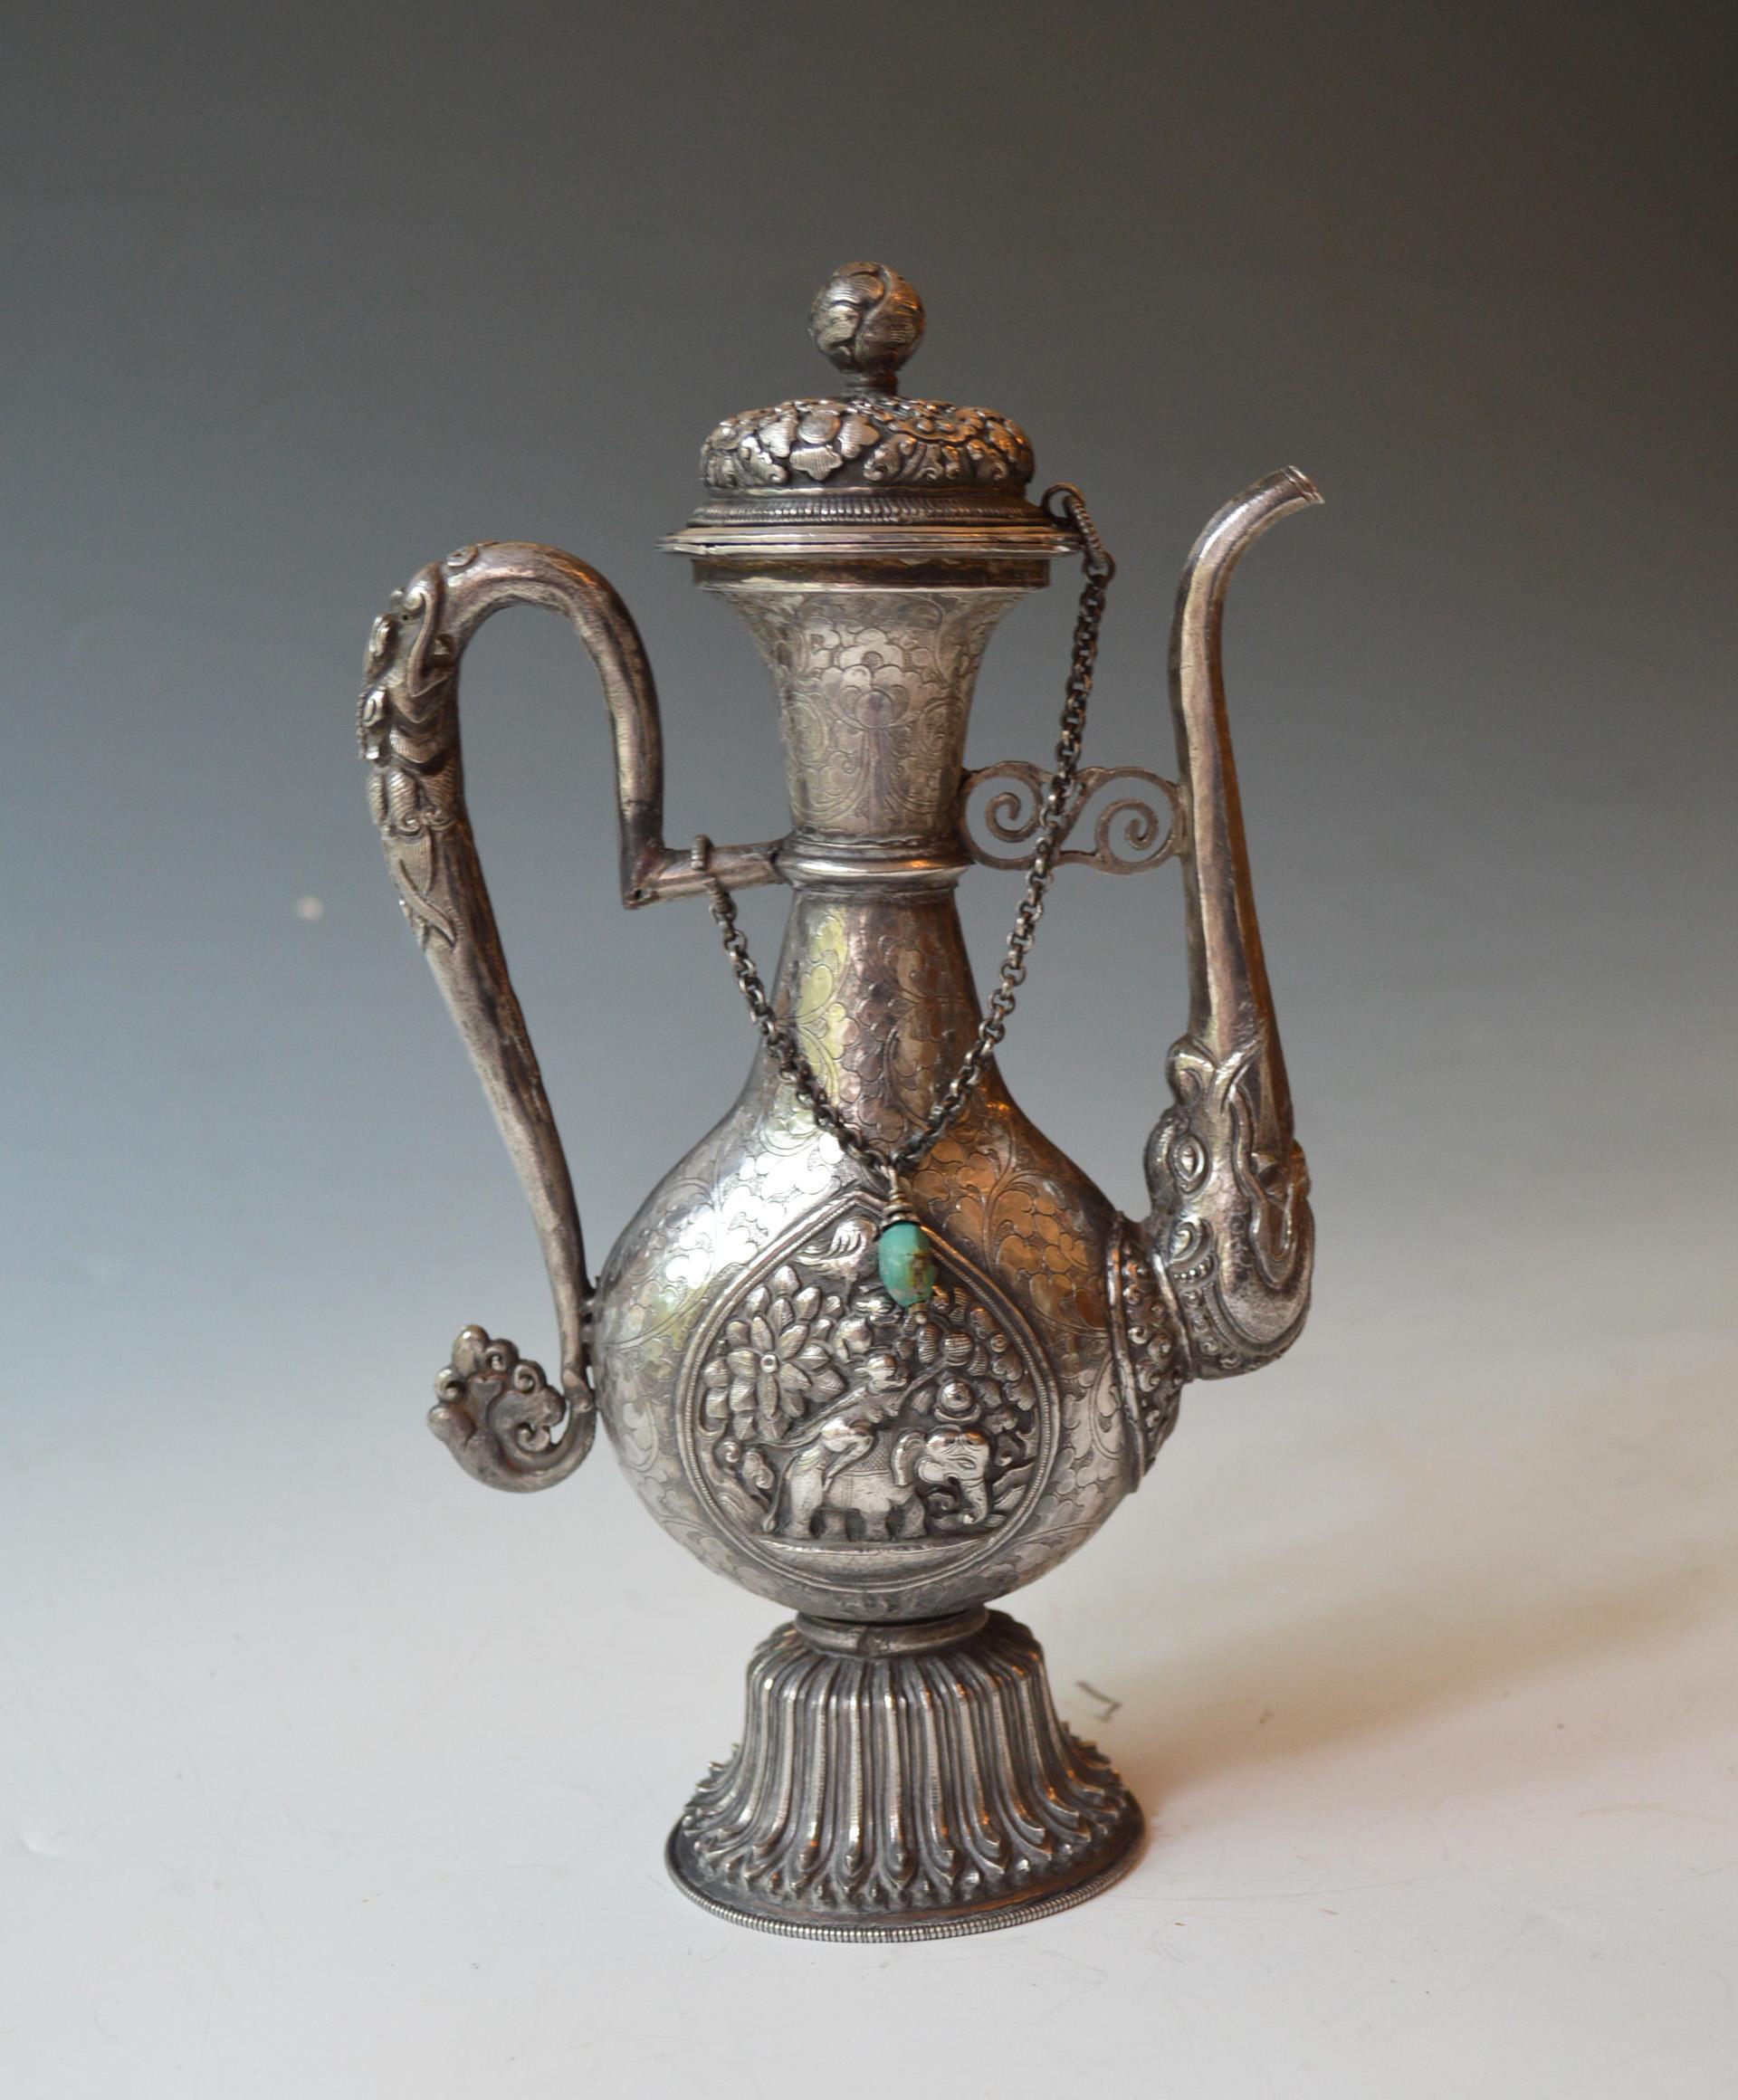 Fine Antique Tibetan Ritual Silver Ewer Asian Chinese Buddhist antiques 
 
A ritual water ceremony ewer very finely crafted in high grade silver with hammered chased and repoussé Buddhist designs all over  
Height   24  x  W 15 cm. 475 grams
Period